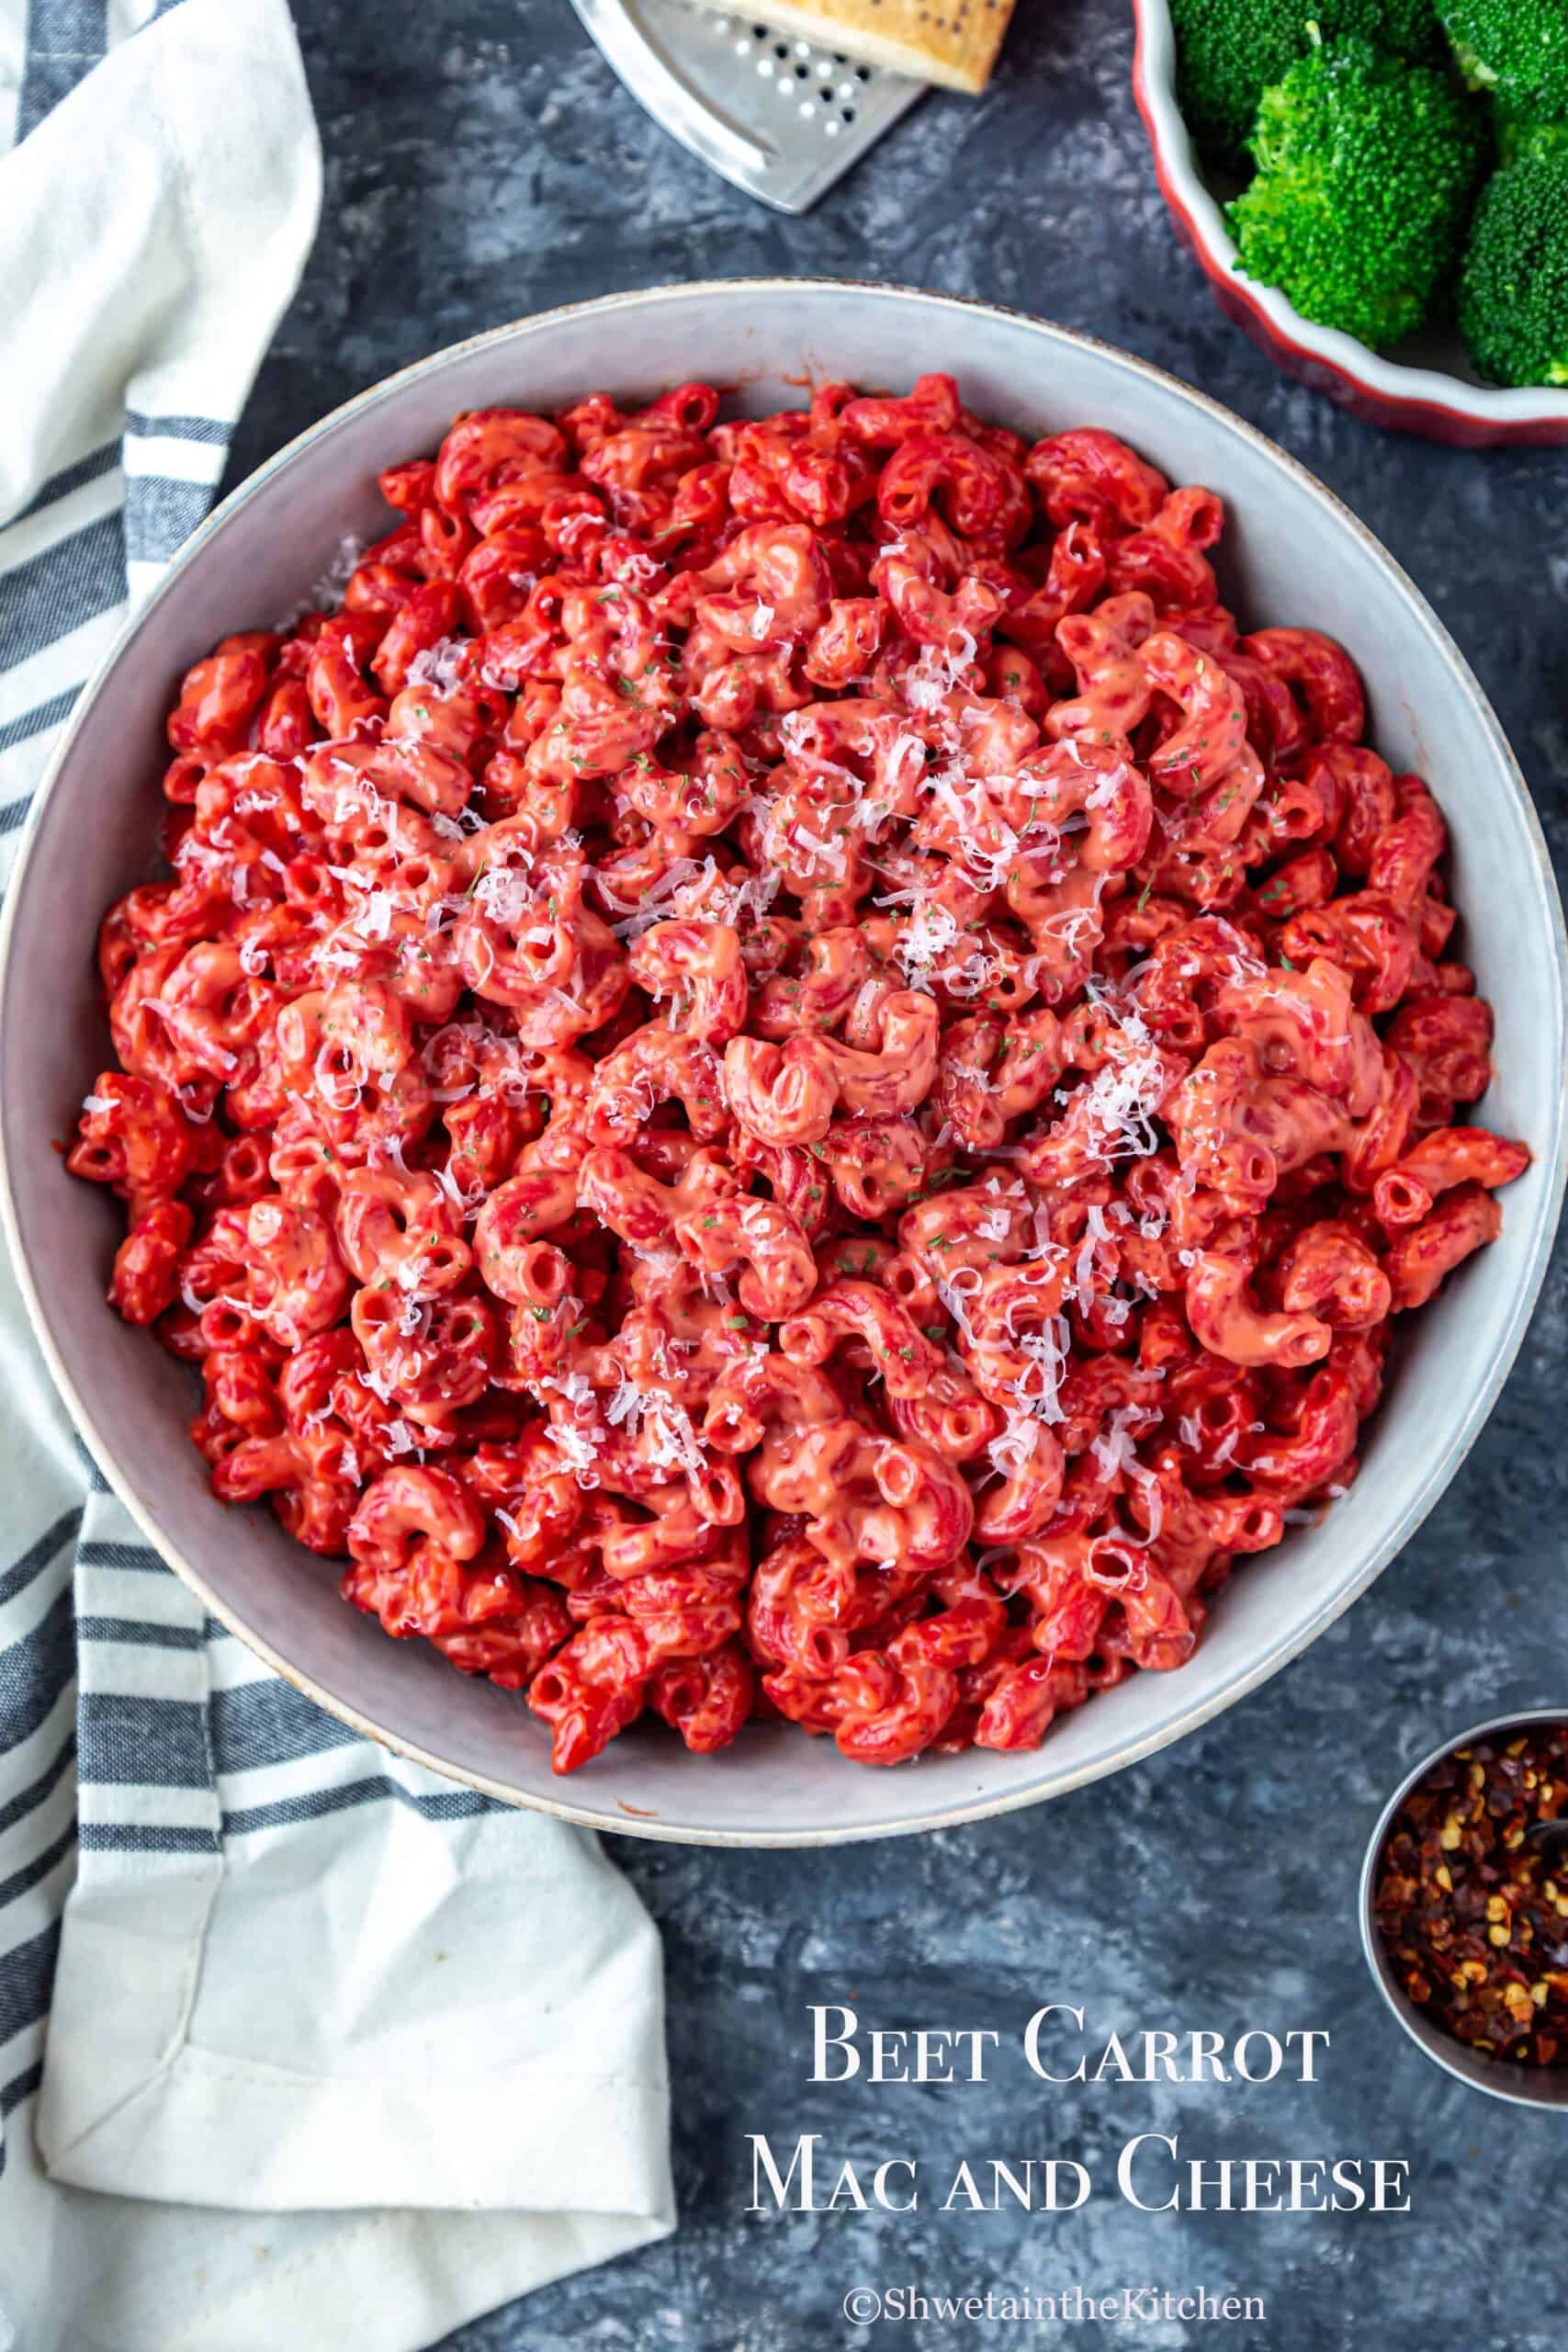 Beet and Carrot Mac and Cheese